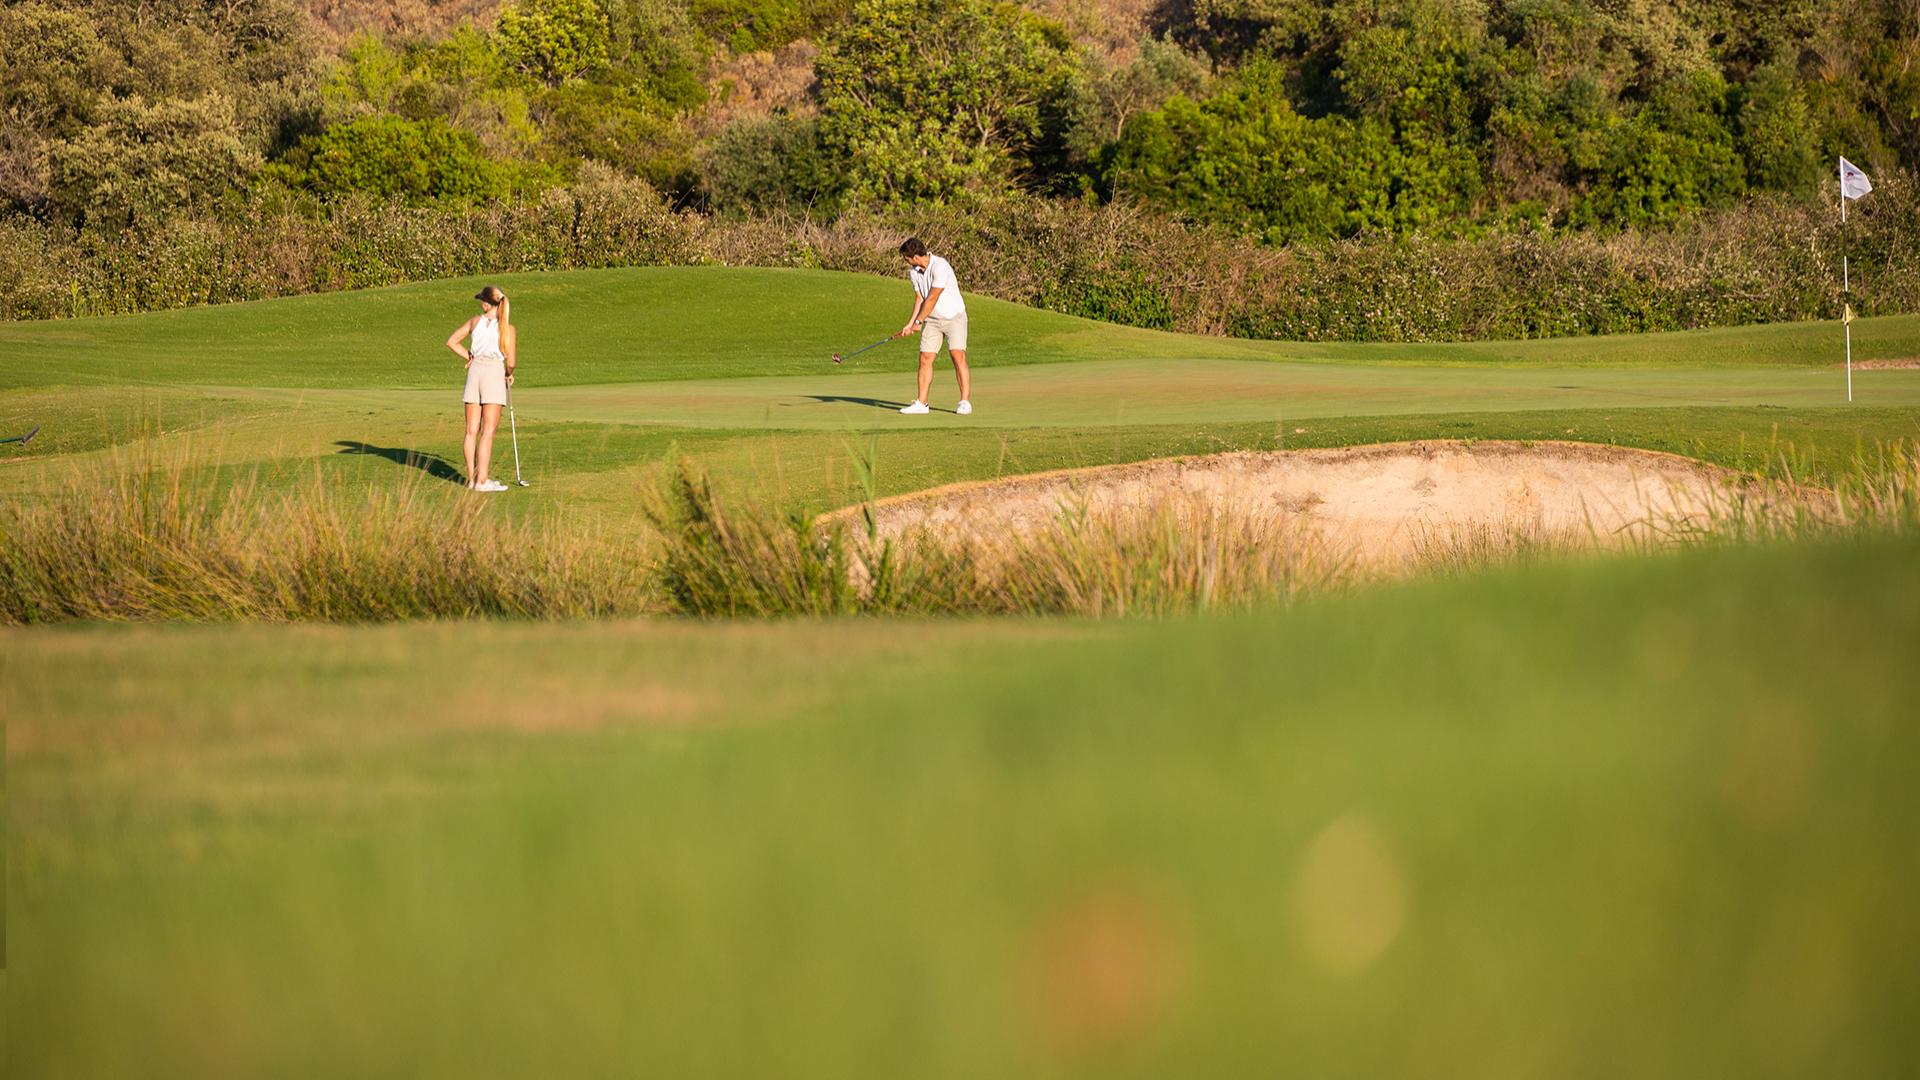 How to score at the award-winning Faldo Course?